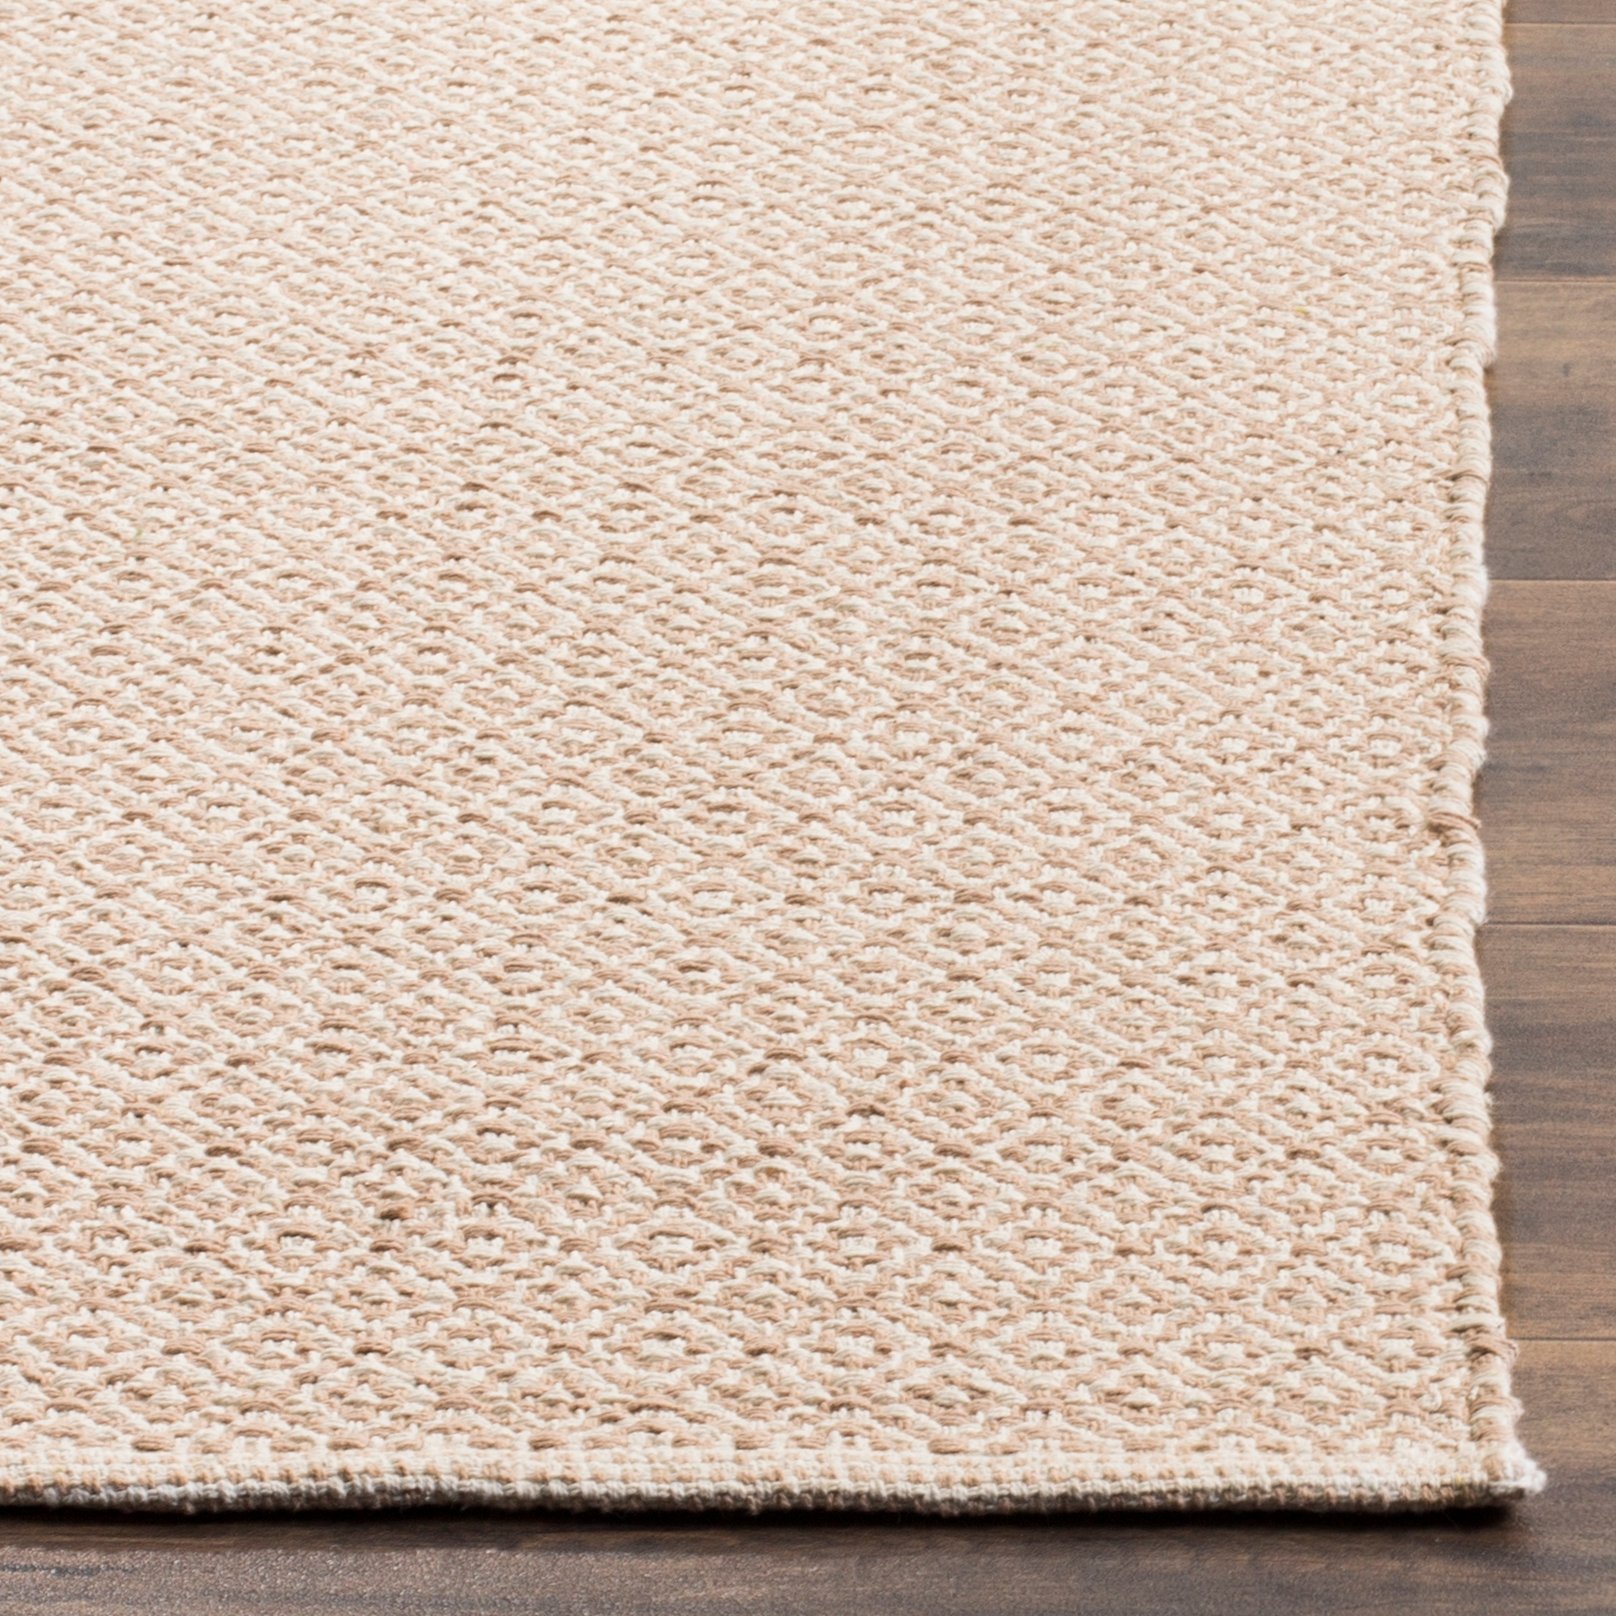 Arlo Home Hand Woven Area Rug, MTK717G, Ivory/Beige,  6' X 6' Square - Image 1